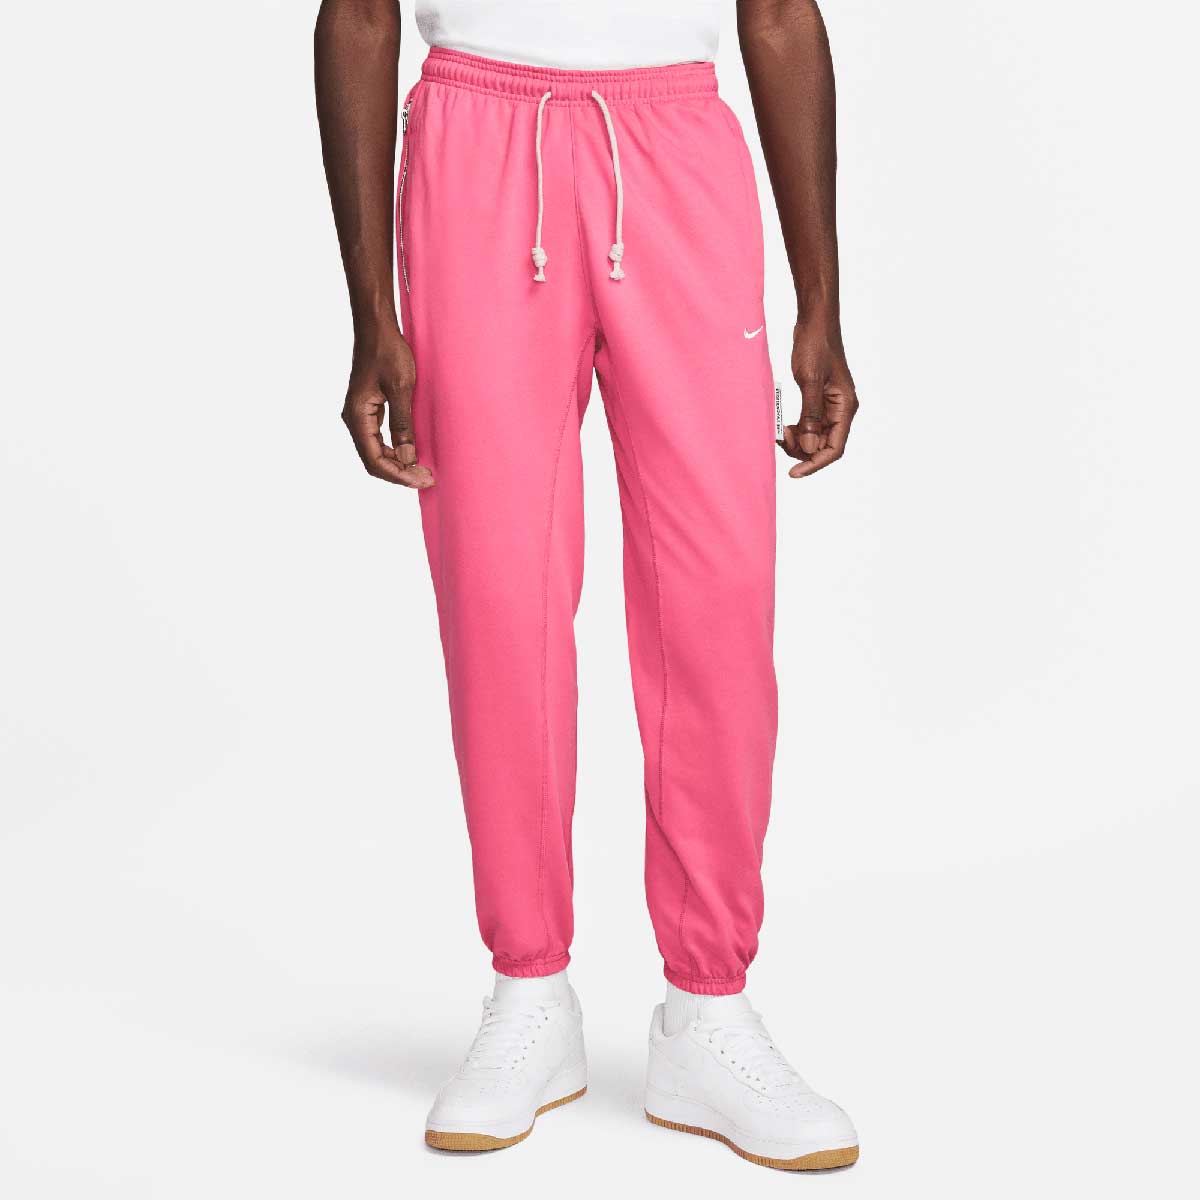 Nike Dri-Fit Standard Issue Pants, Pinksicle/Pale Ivory